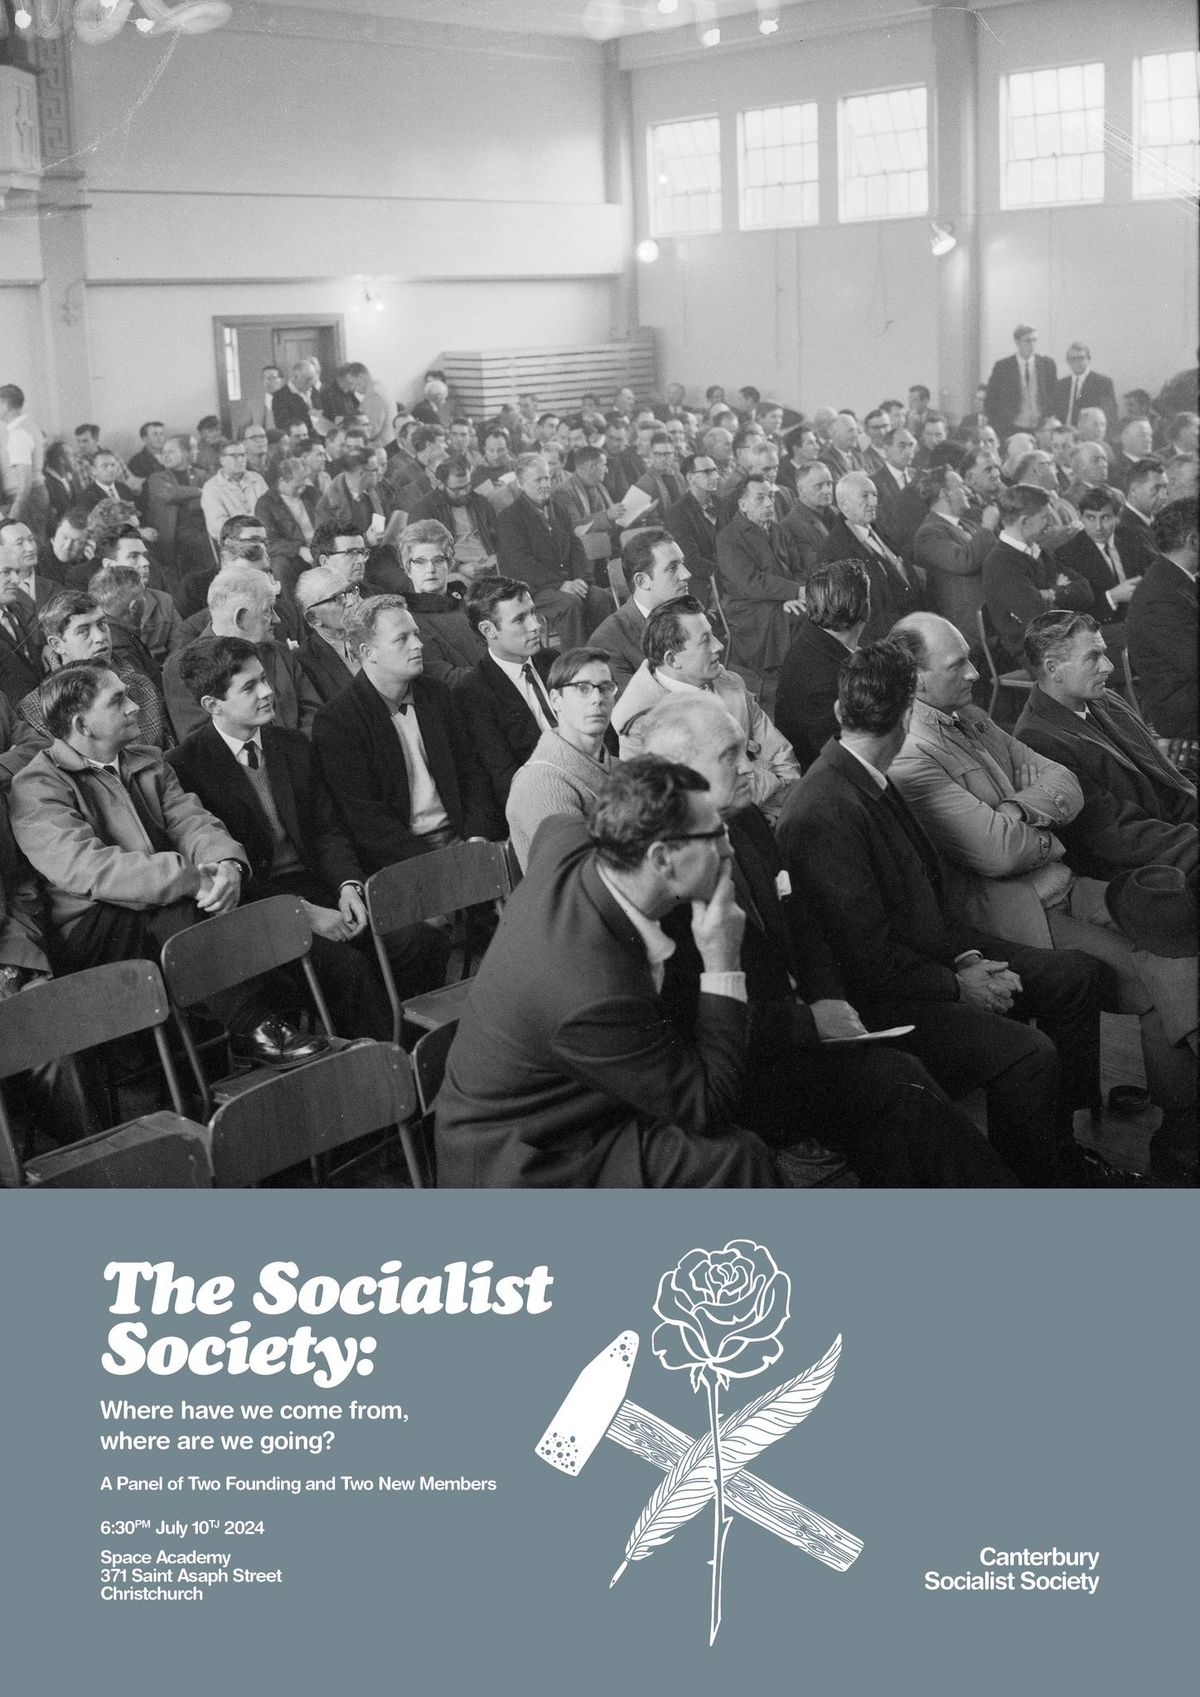 Panel Event - The Socialist Society: Where have we come from, where are we going?